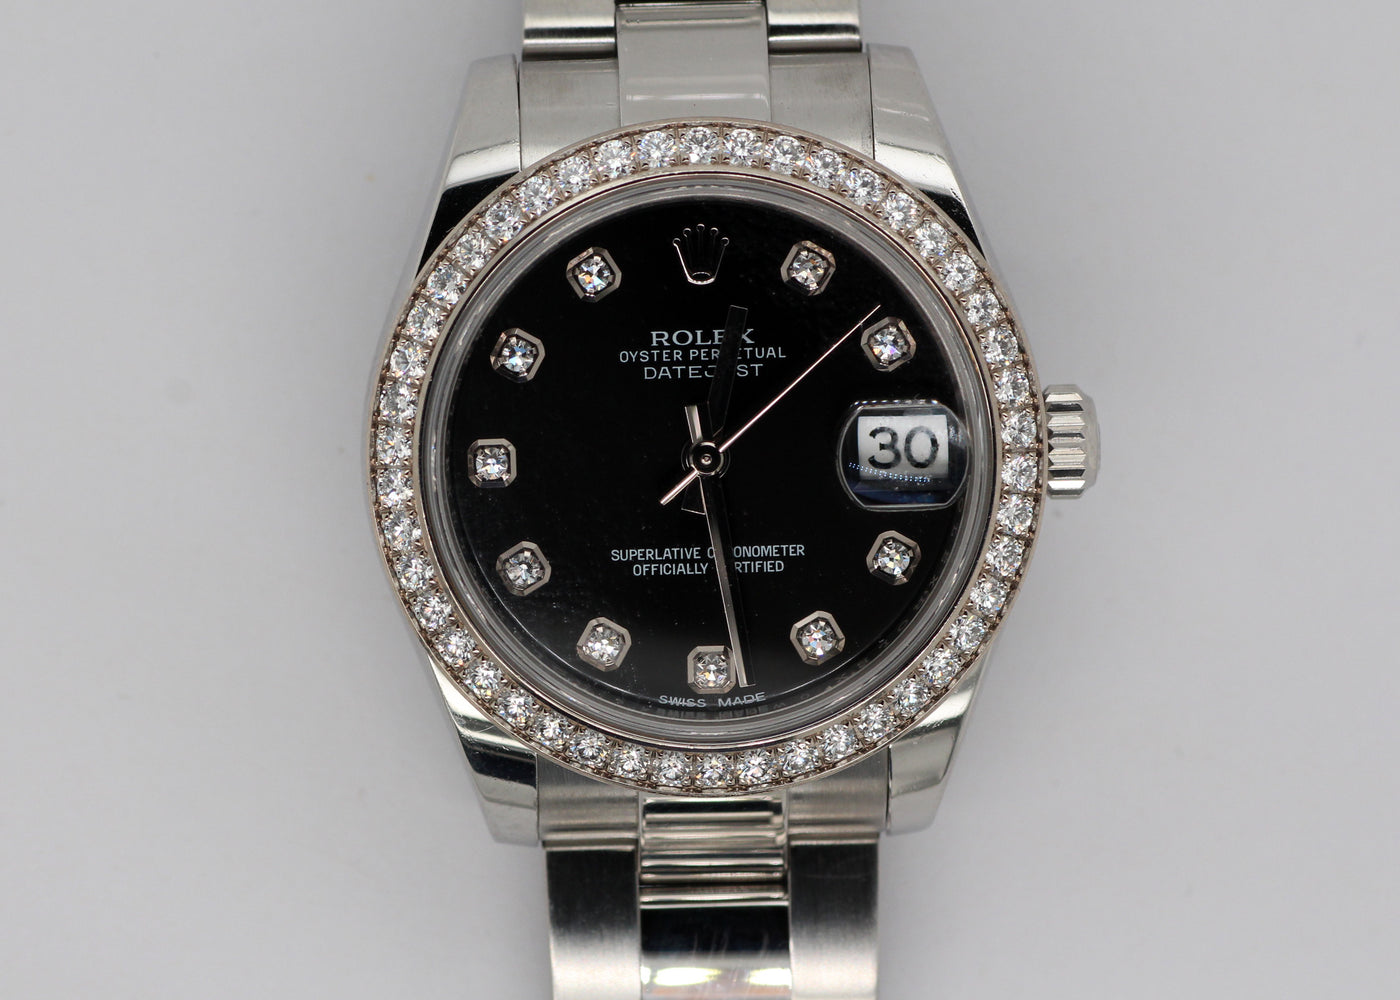 MIDSIZE STAINLESS ROLEX DATEJUST WITH BLACK DIAMOND DIAL AND DIAMOND B